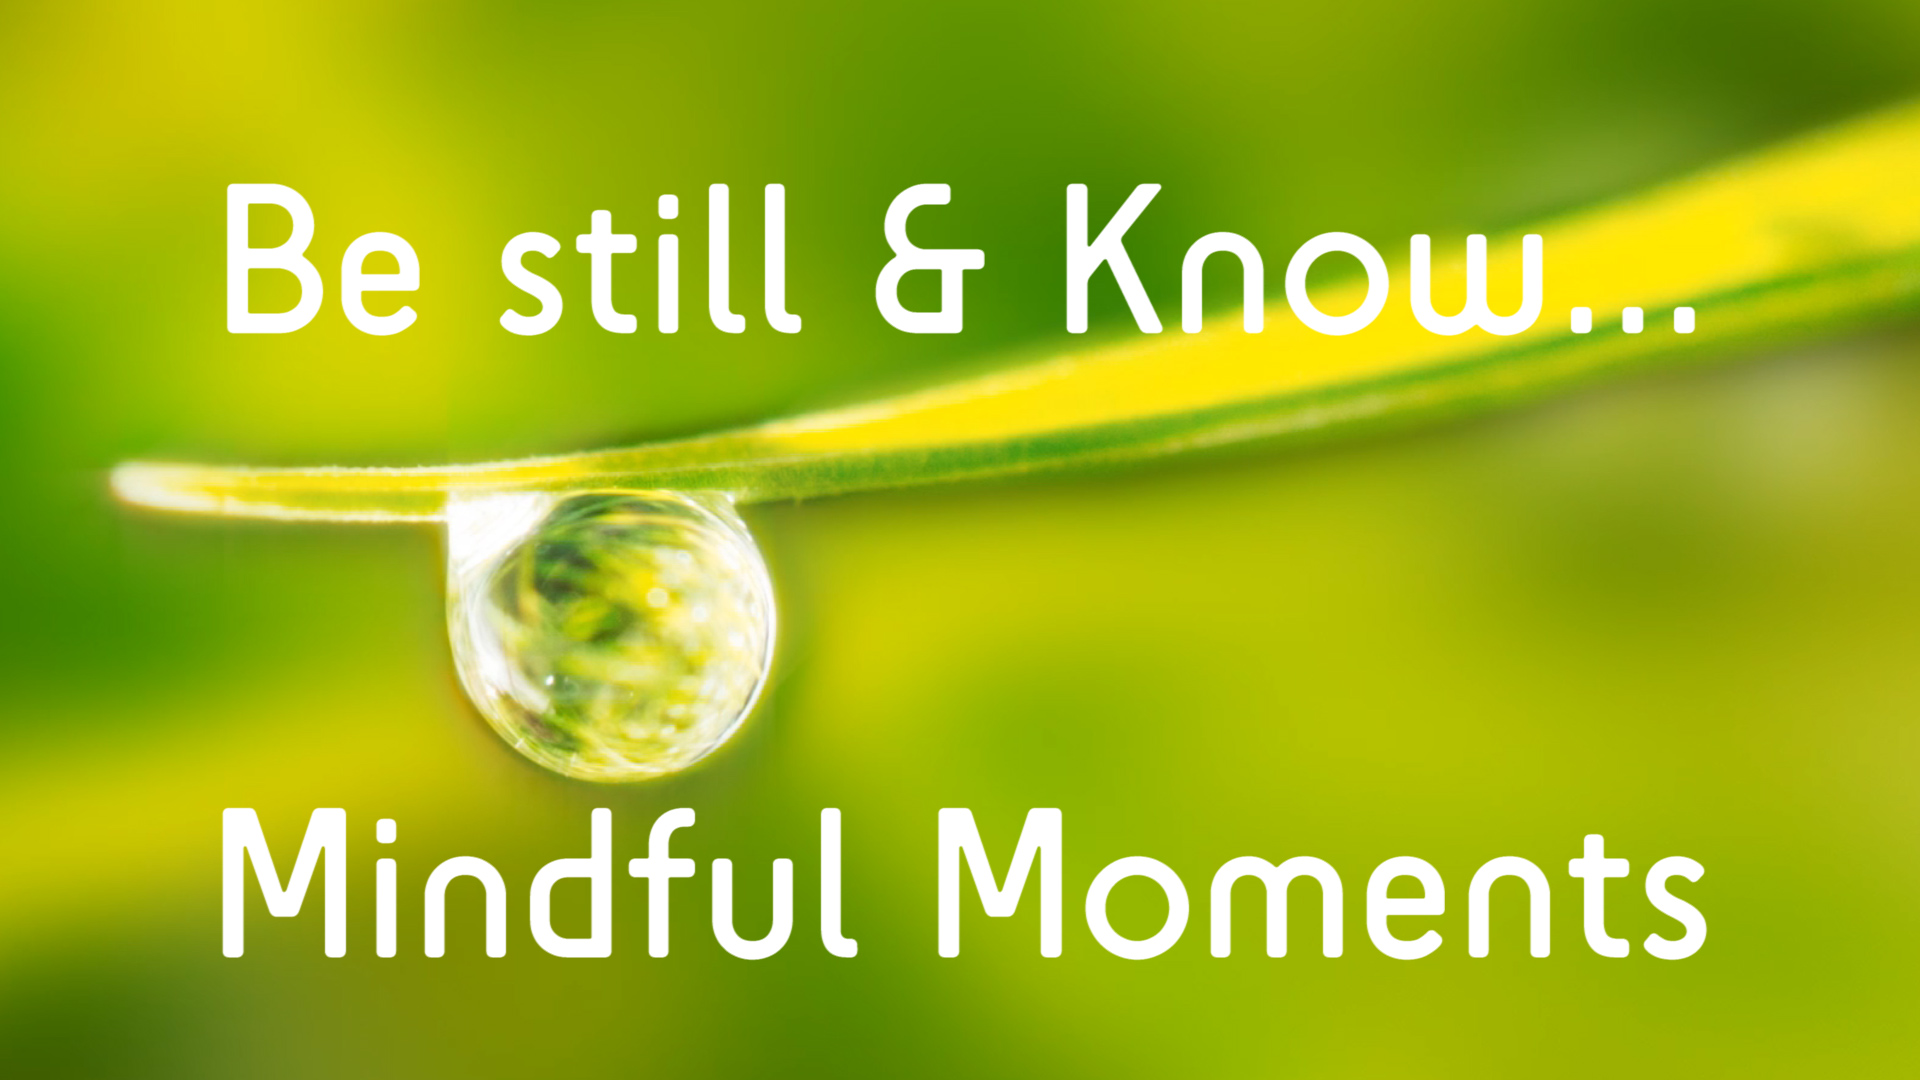 Screenshot of online video prayer series "Be Still and Know... Mindful Moments"